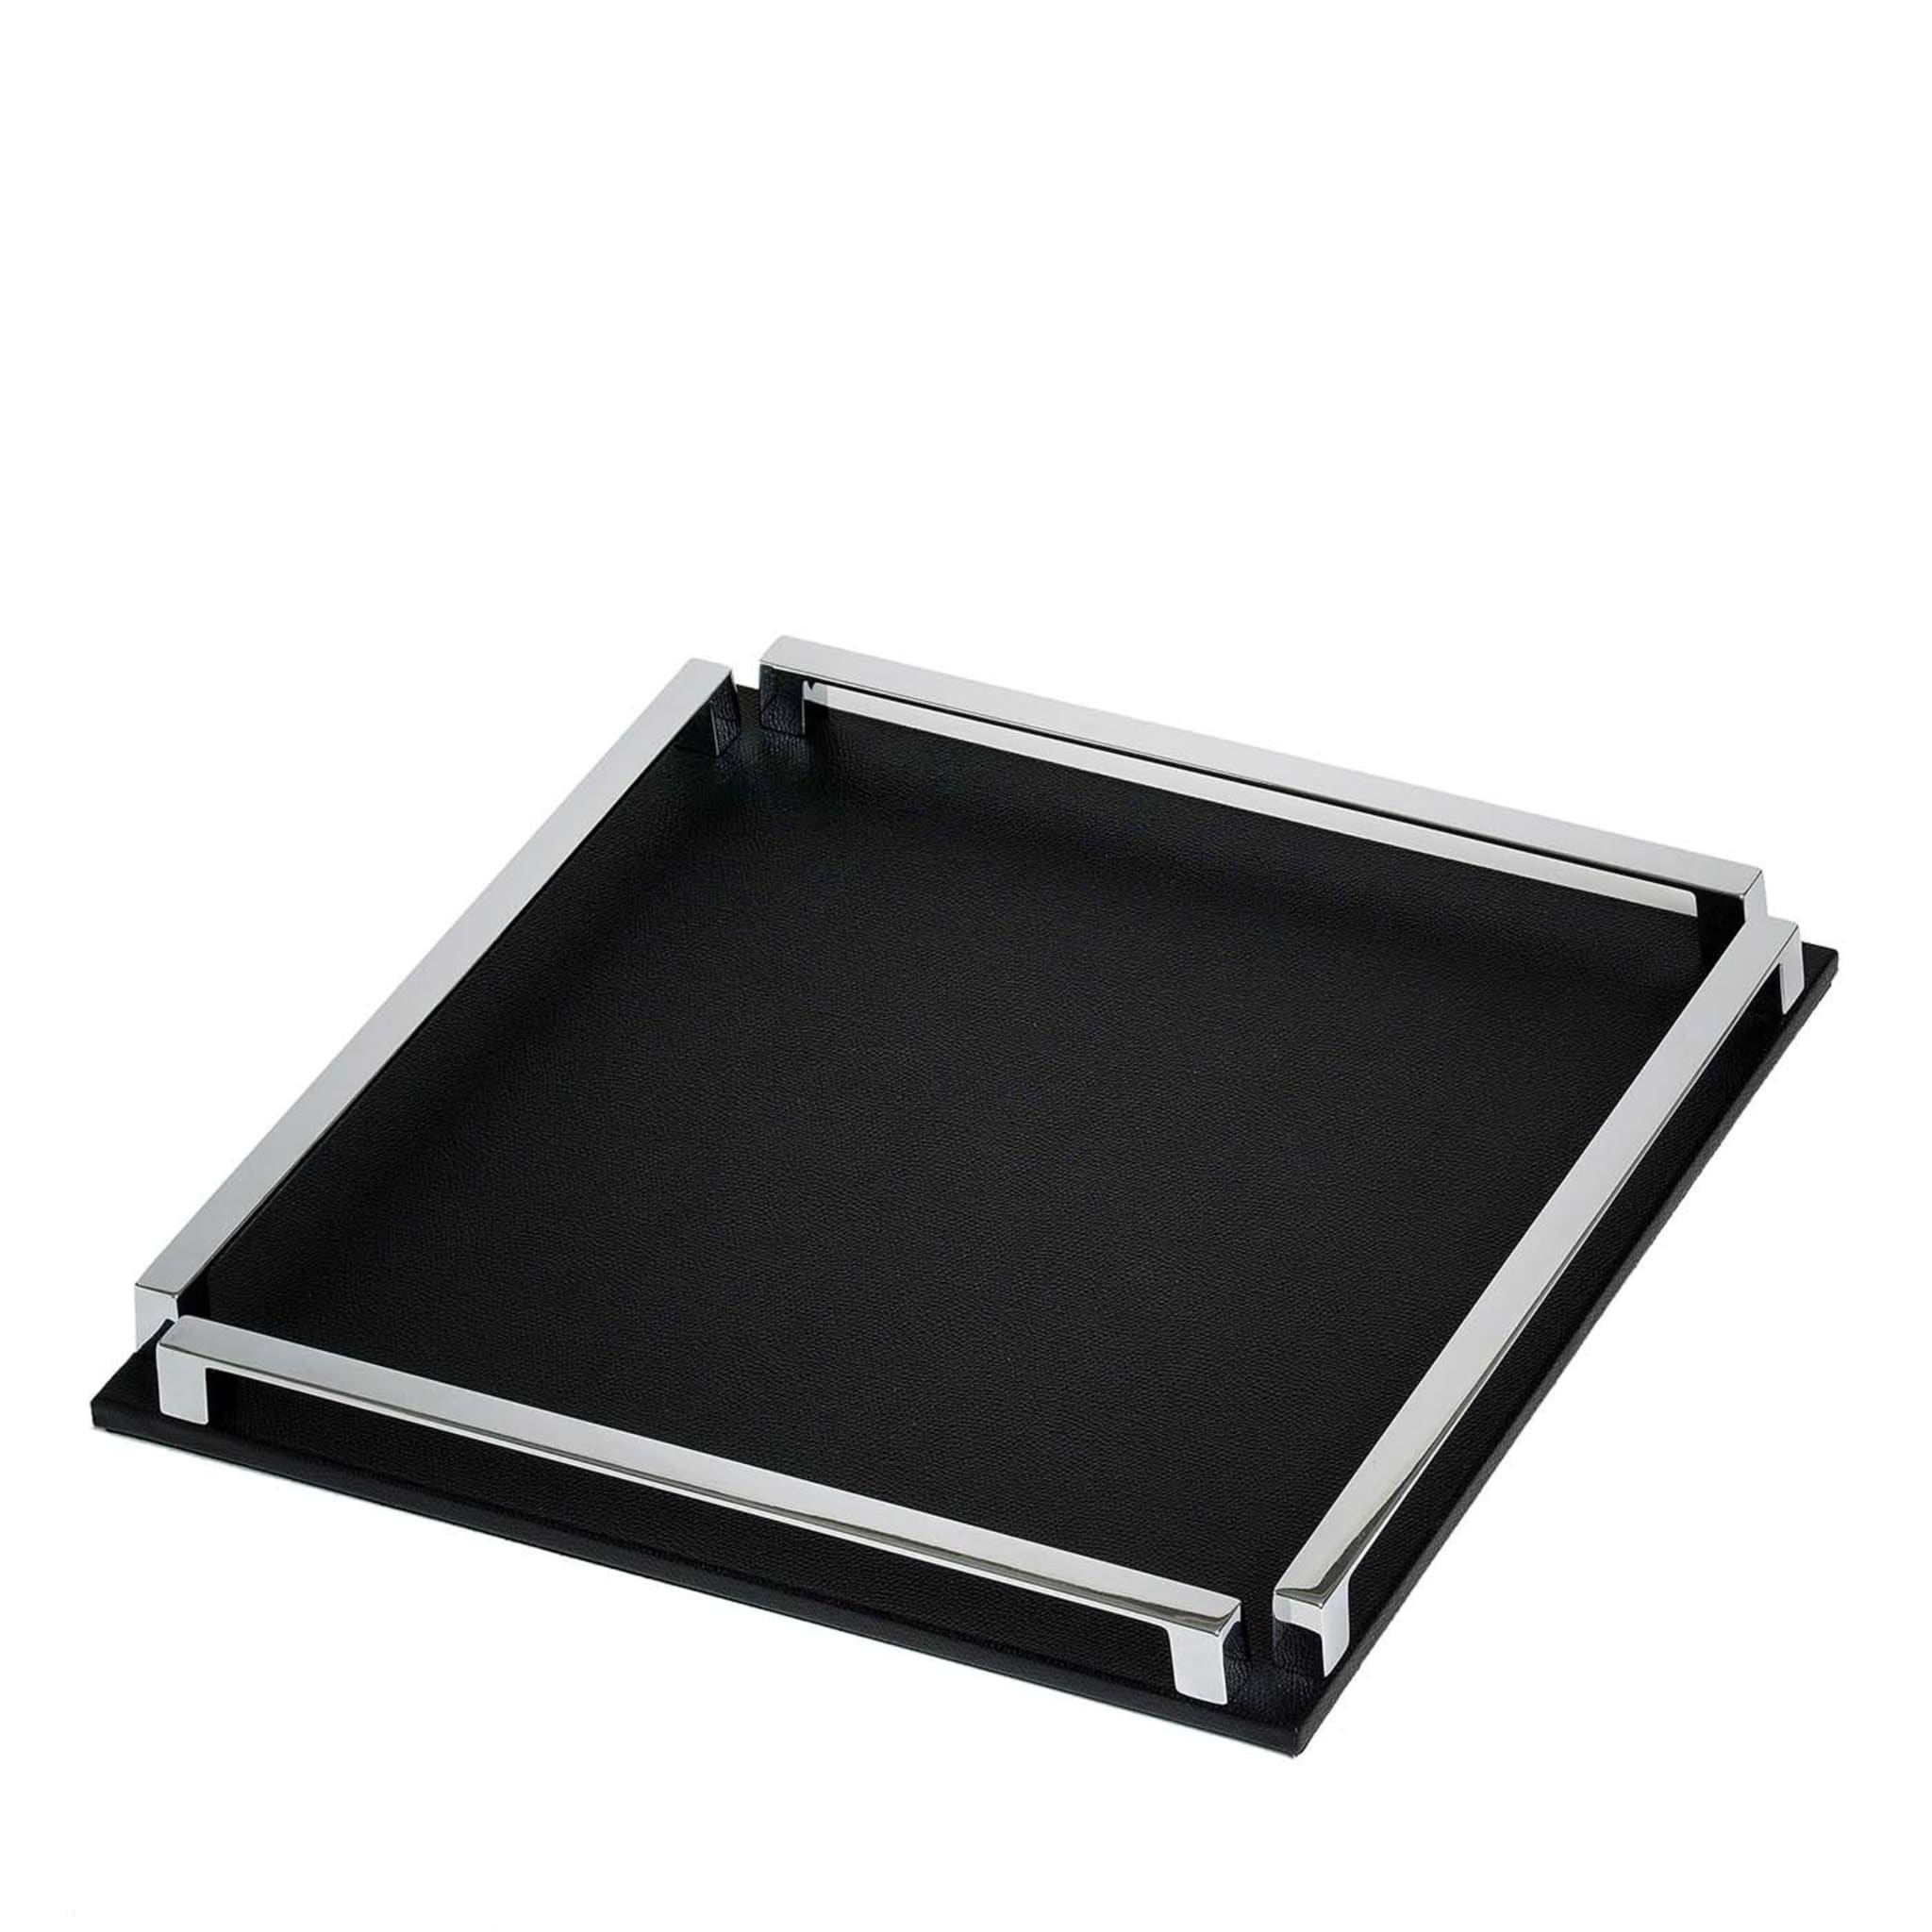 Paul Square Black Leather Tray - Main view